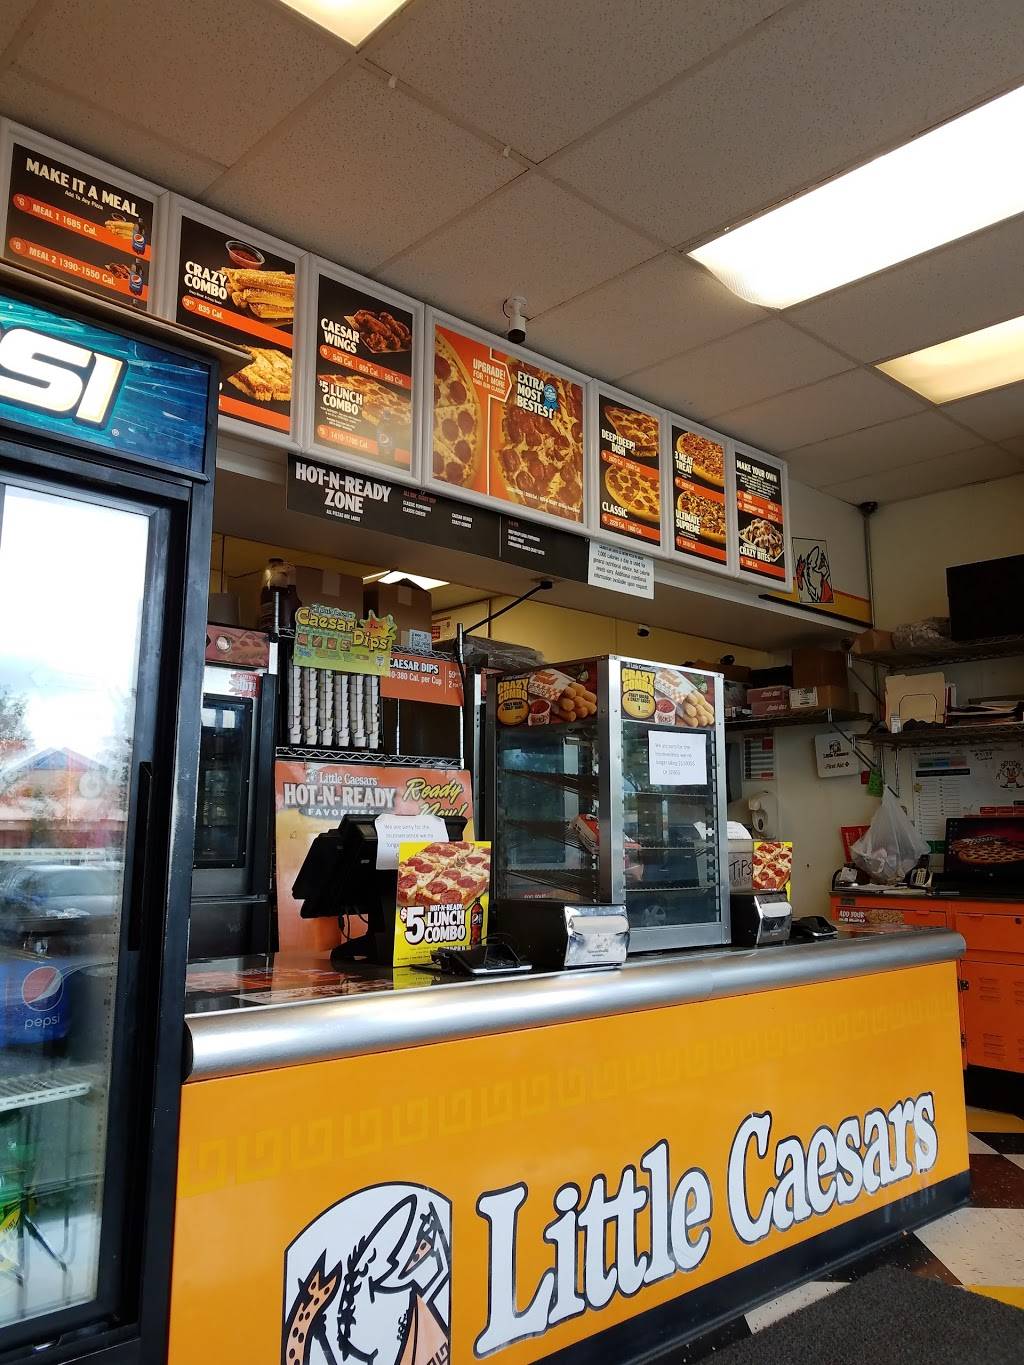 Little Caesars Pizza | meal takeaway | 221-G, NE 104th Ave, Vancouver, WA 98664, USA | 3608968583 OR +1 360-896-8583